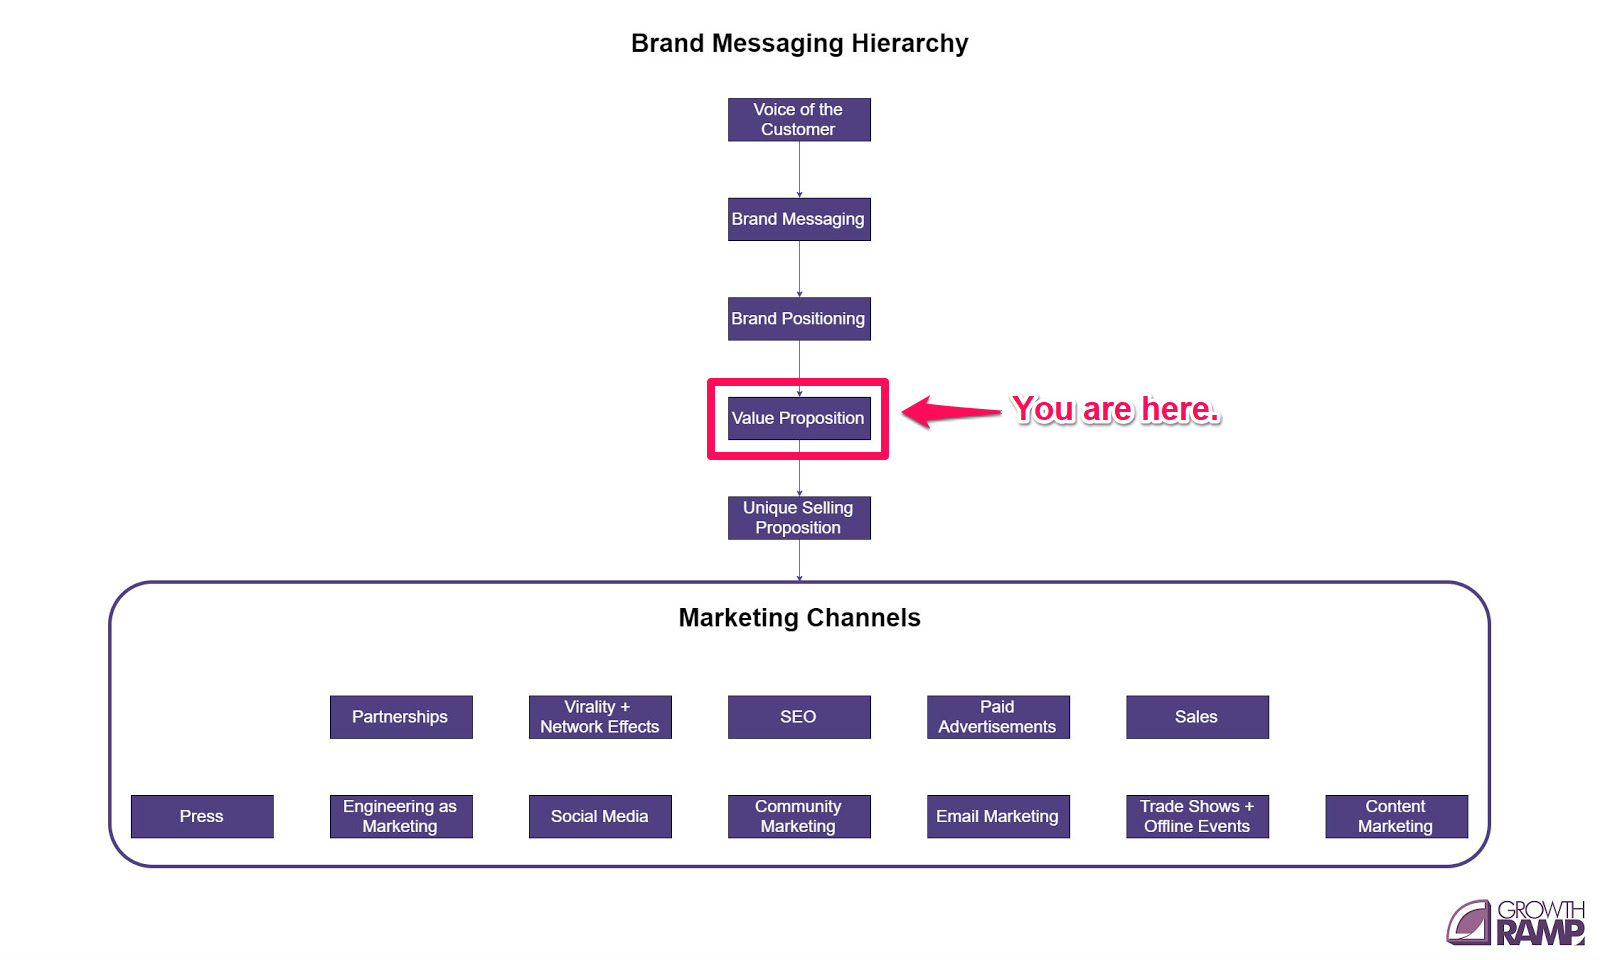 What is brand positioning? How to have a clear position in the market?